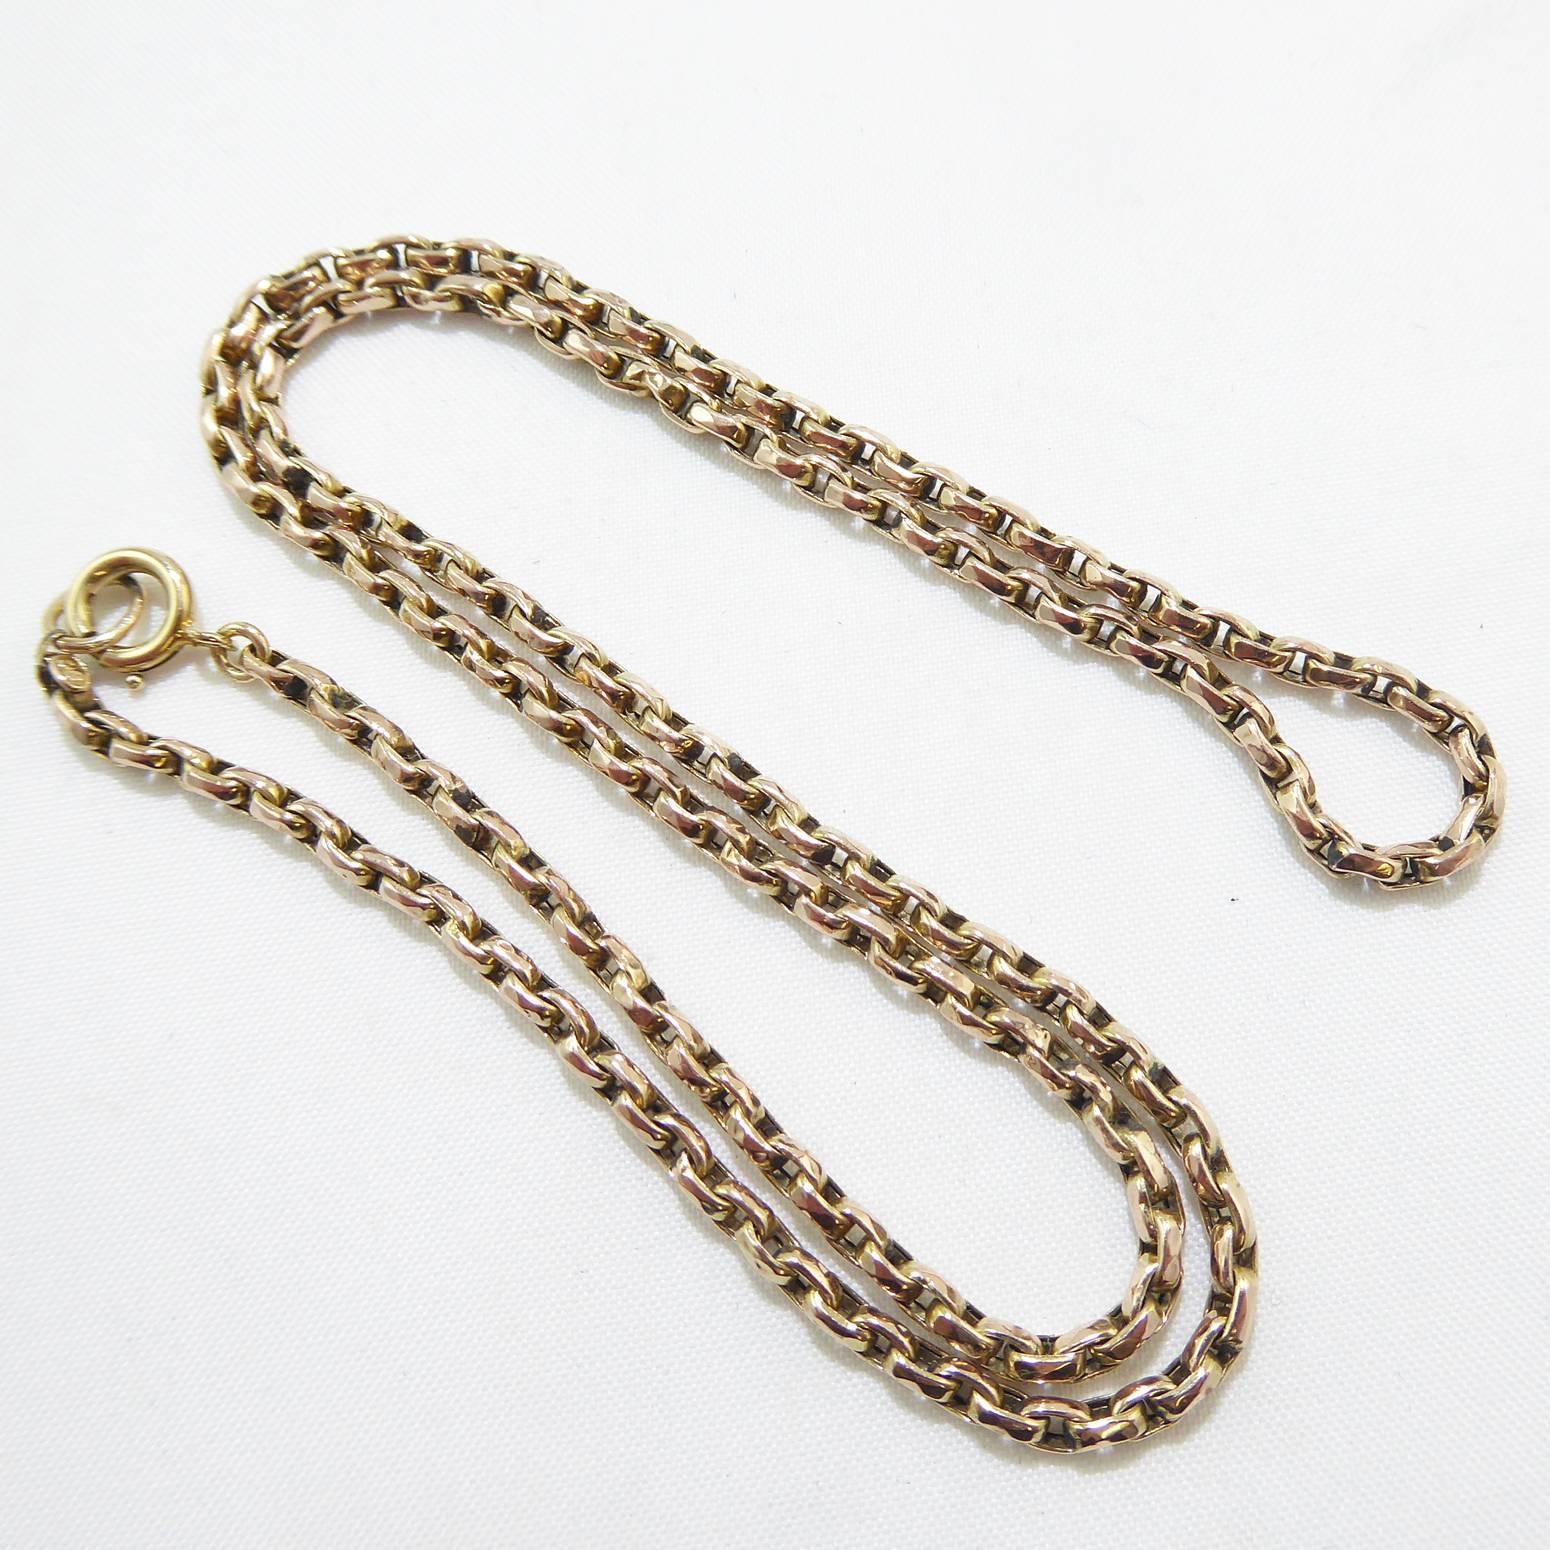 A Victorian chain comprised of oval belcher links in 9ct rose gold.  At 18" long the chain is the perfect length  for pendants or for wearing alone. Lightweight so easy to wear and fastening with a bolt ring catch.